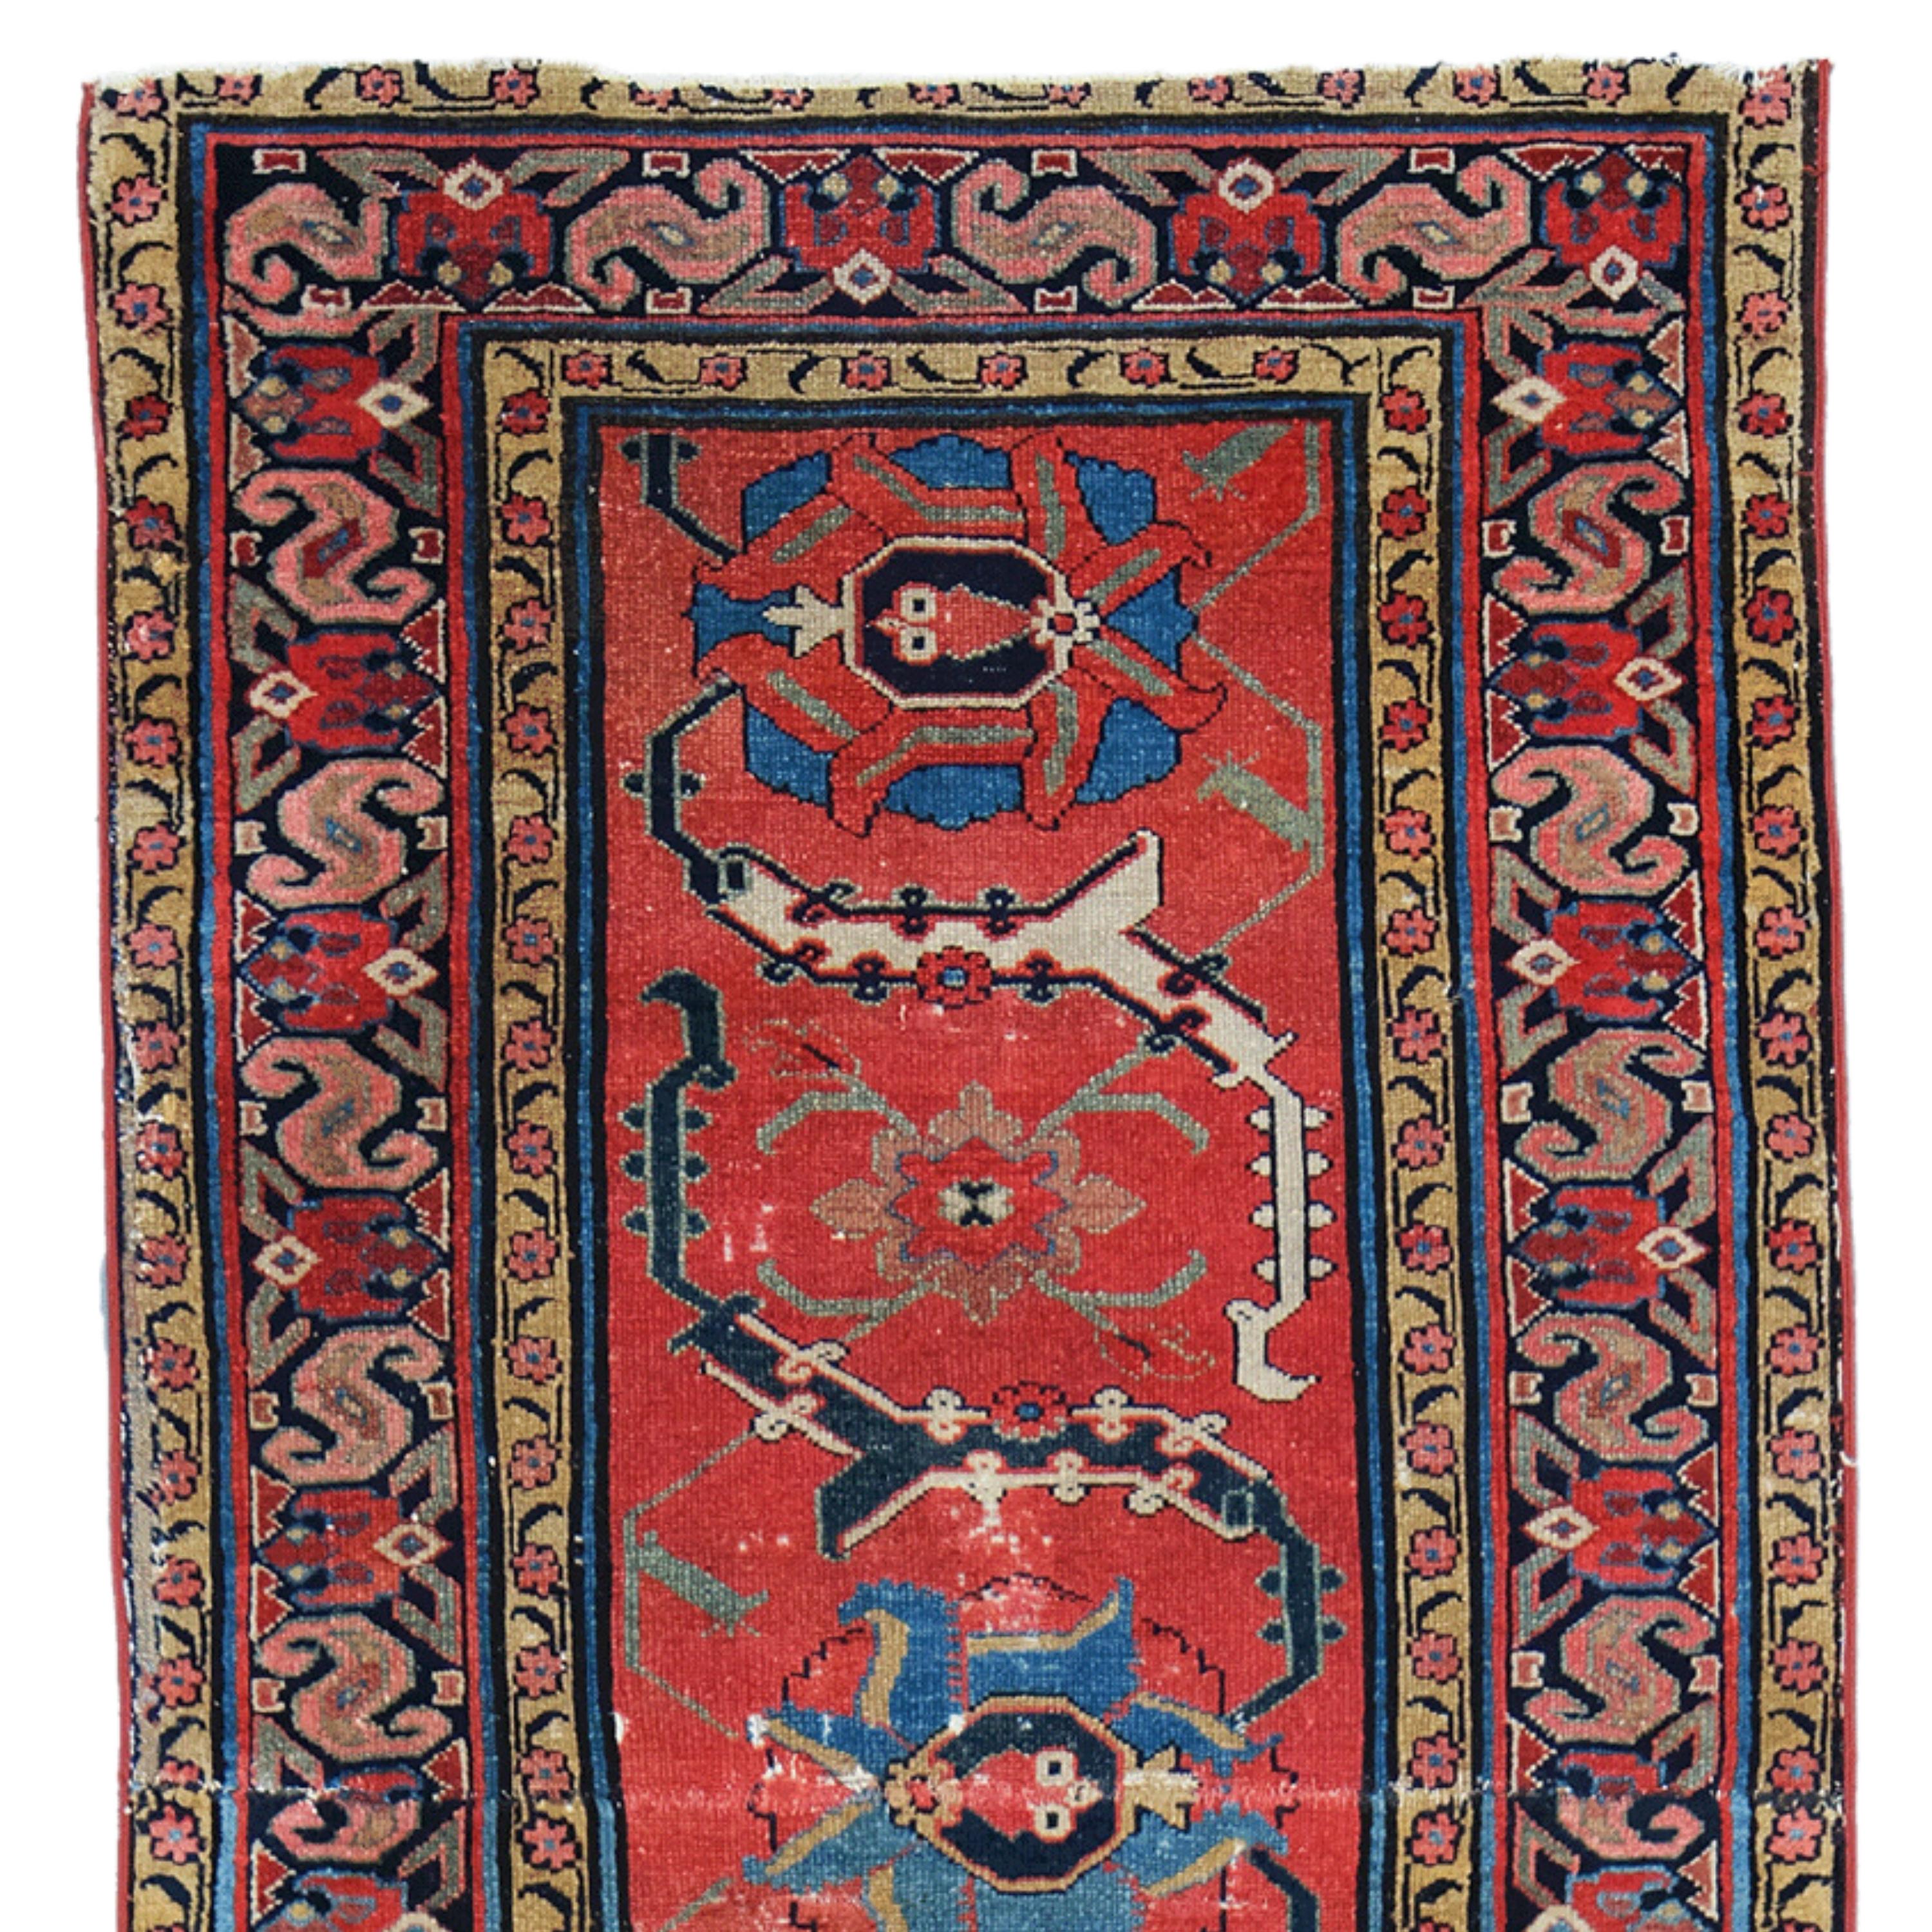 This elegant 19th-century Northwest runner is an example of the finest craftsmanship of its period. With its rich color palette and intricate patterns, this piece adds an authentic and sophisticated touch to any space. Although worn over the years,